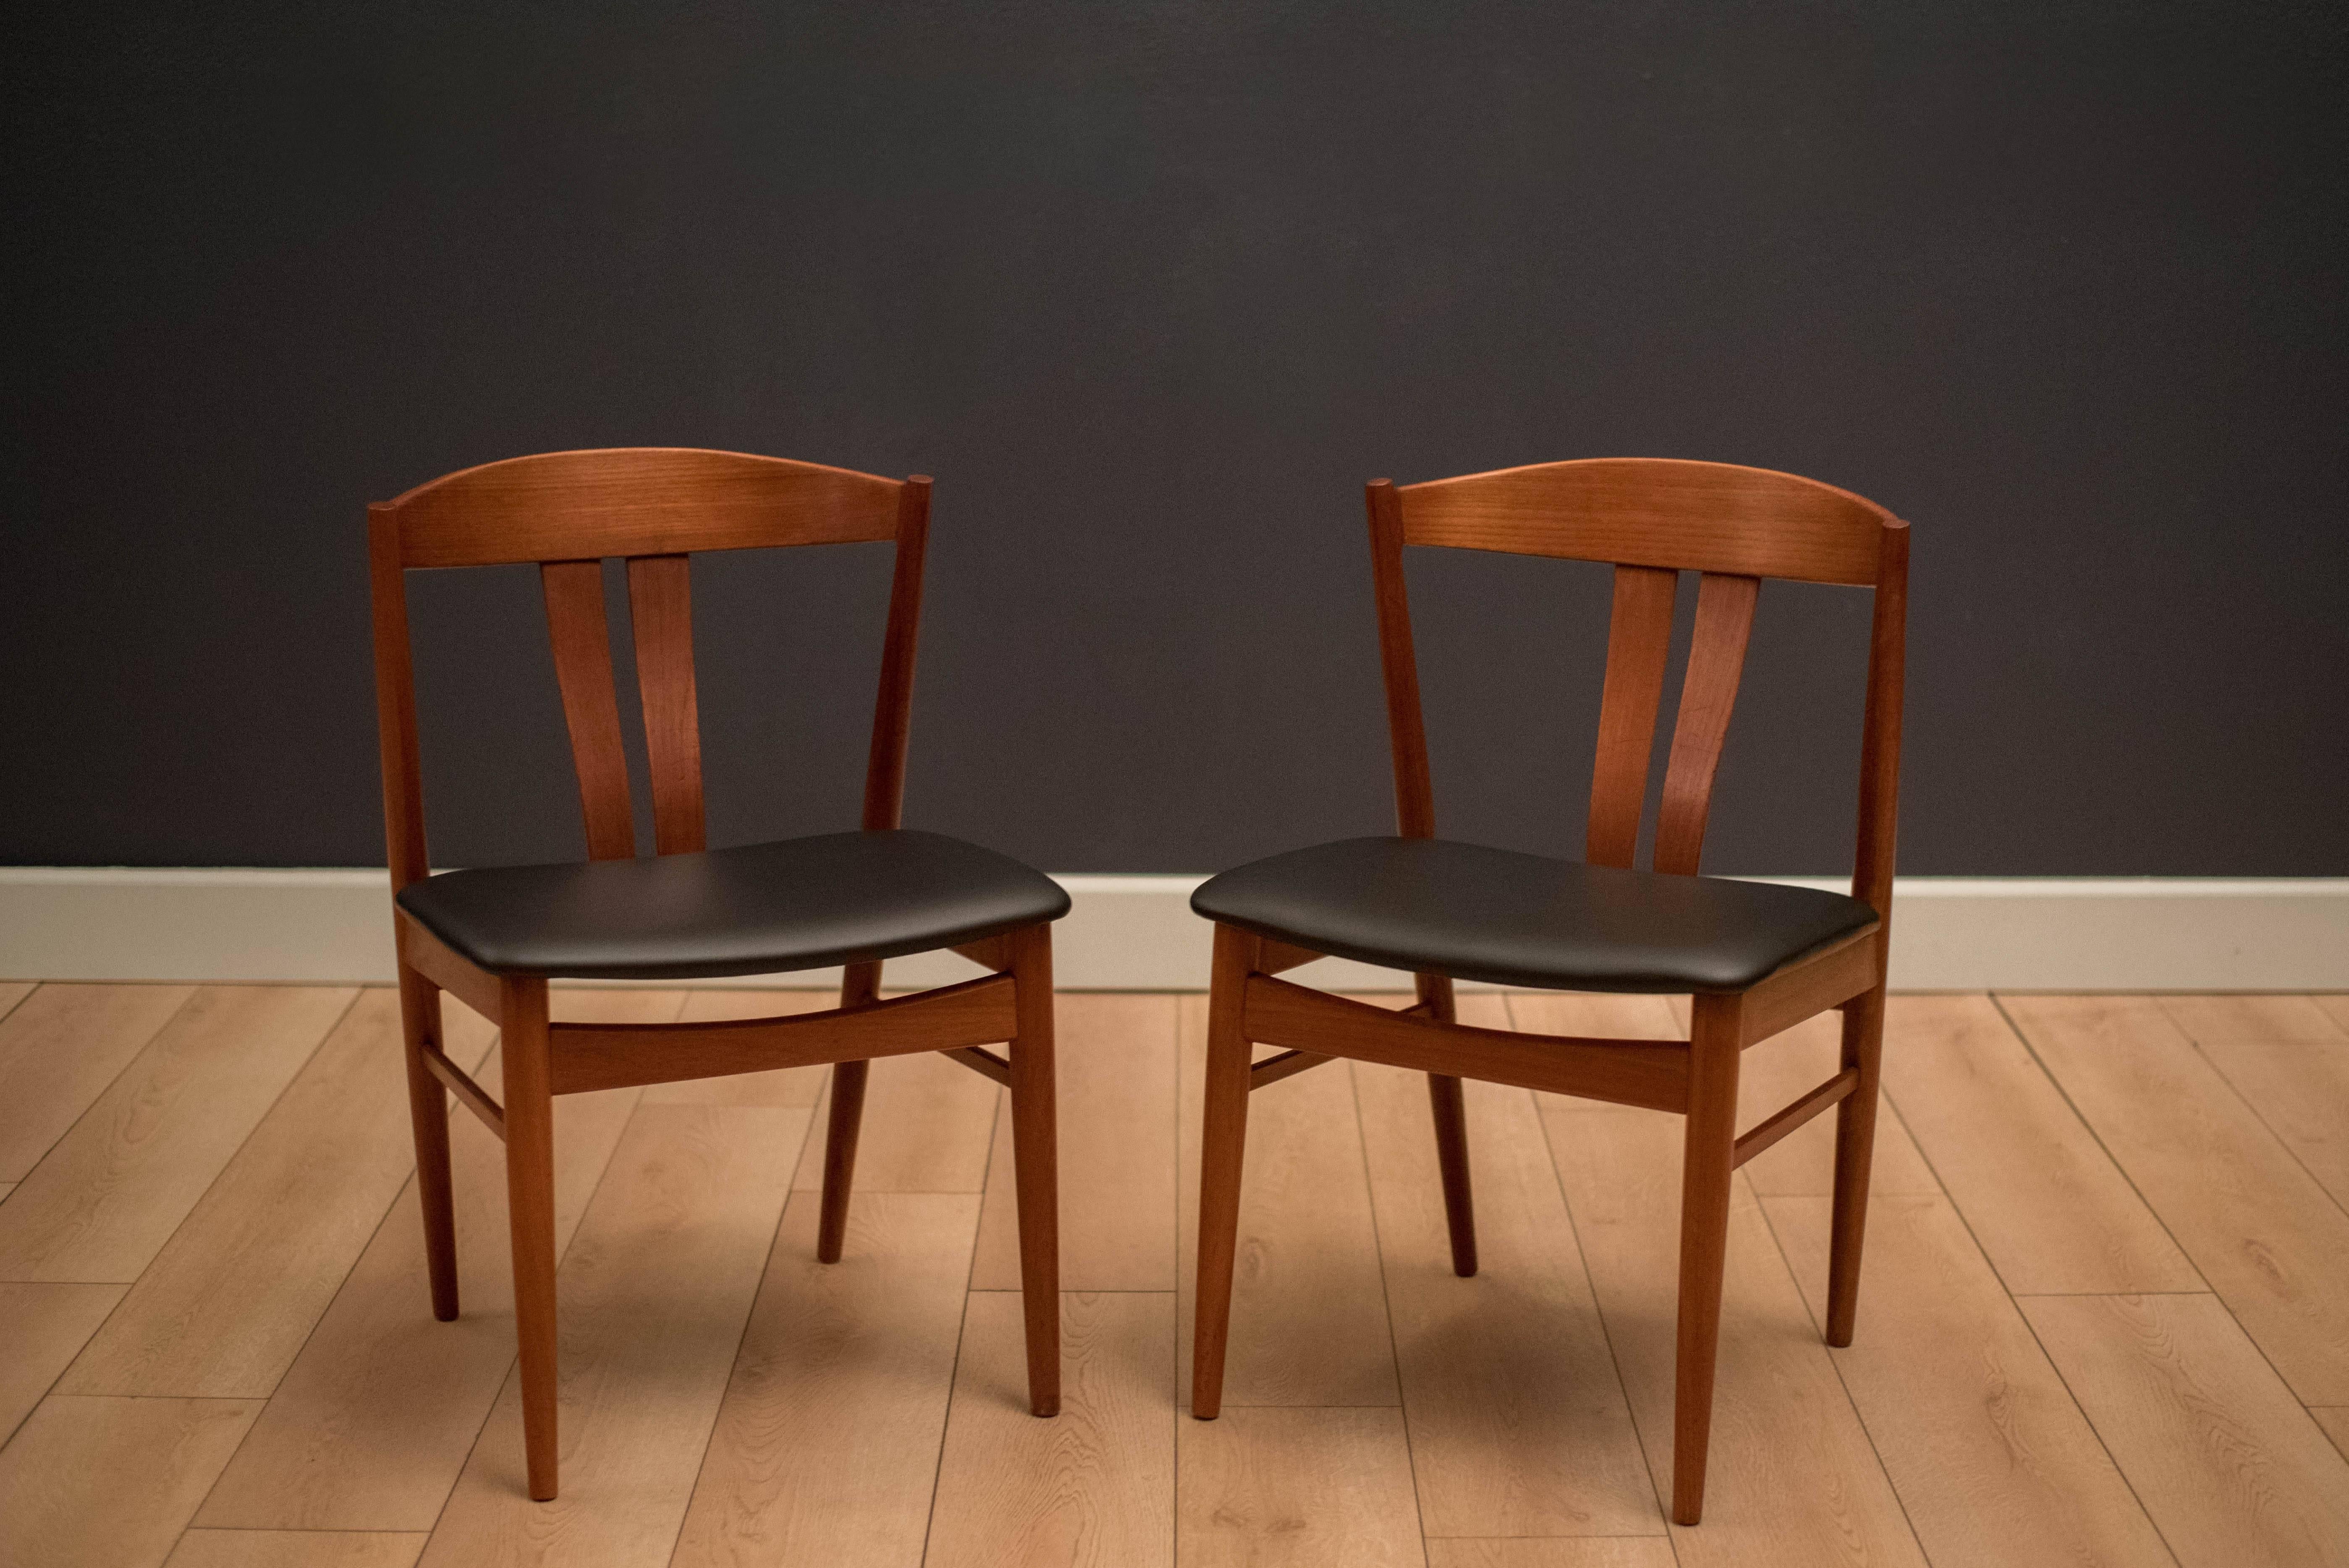 Mid-Century Modern pair of dining chairs by Vejle Stole og Mobelfabrik, Denmark. This set has newly reupholstered seats in black vinyl. Features a sculpted solid teak frame and curved backrest.